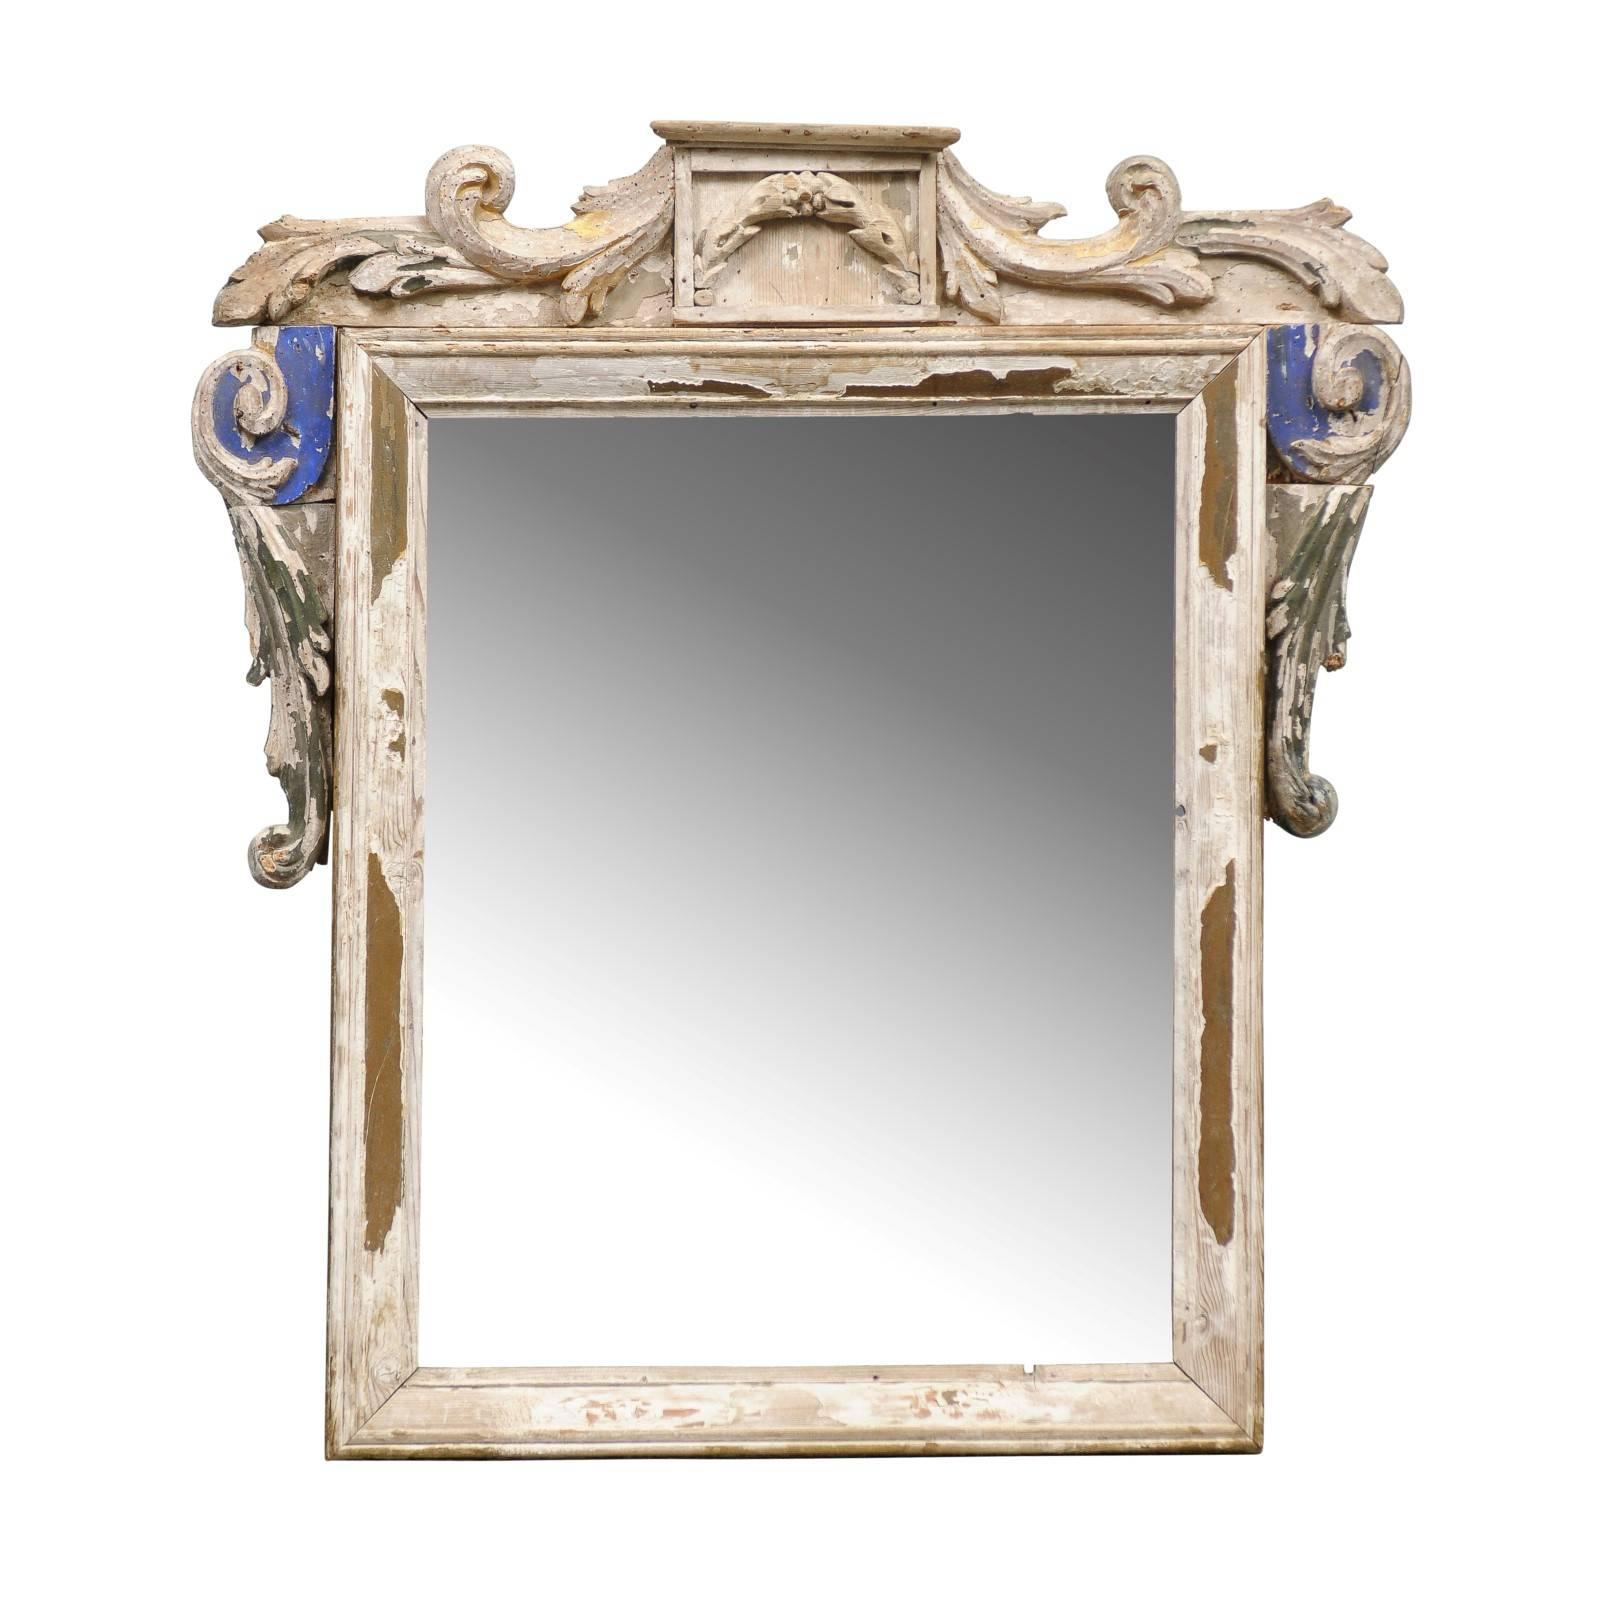 Italian 19th Century Carved Wood Mirror with Volutes Motifs and Blue Accents